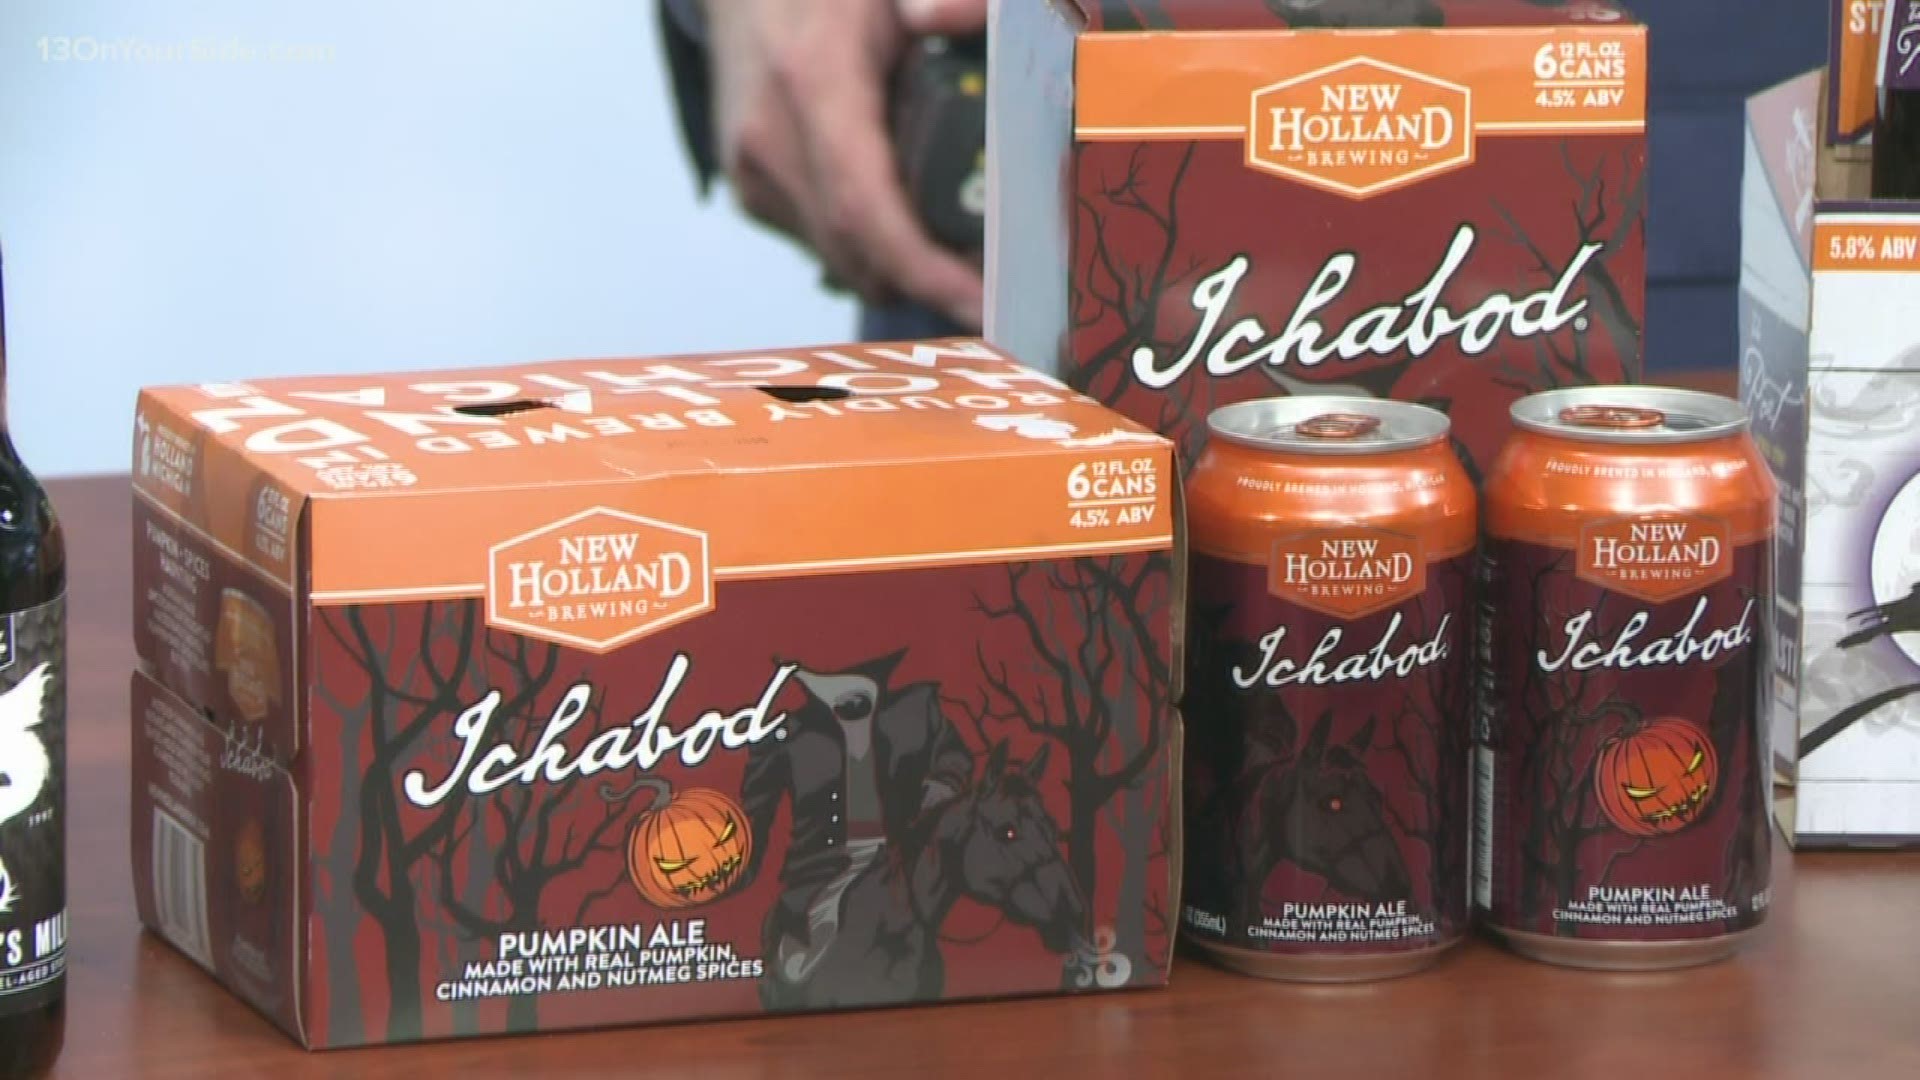 Ichabod sets the mood with the perfect blend of malted barley, real pumpkin and bewitching notes of cinnamon and nutmeg for a delicious and inviting brew.